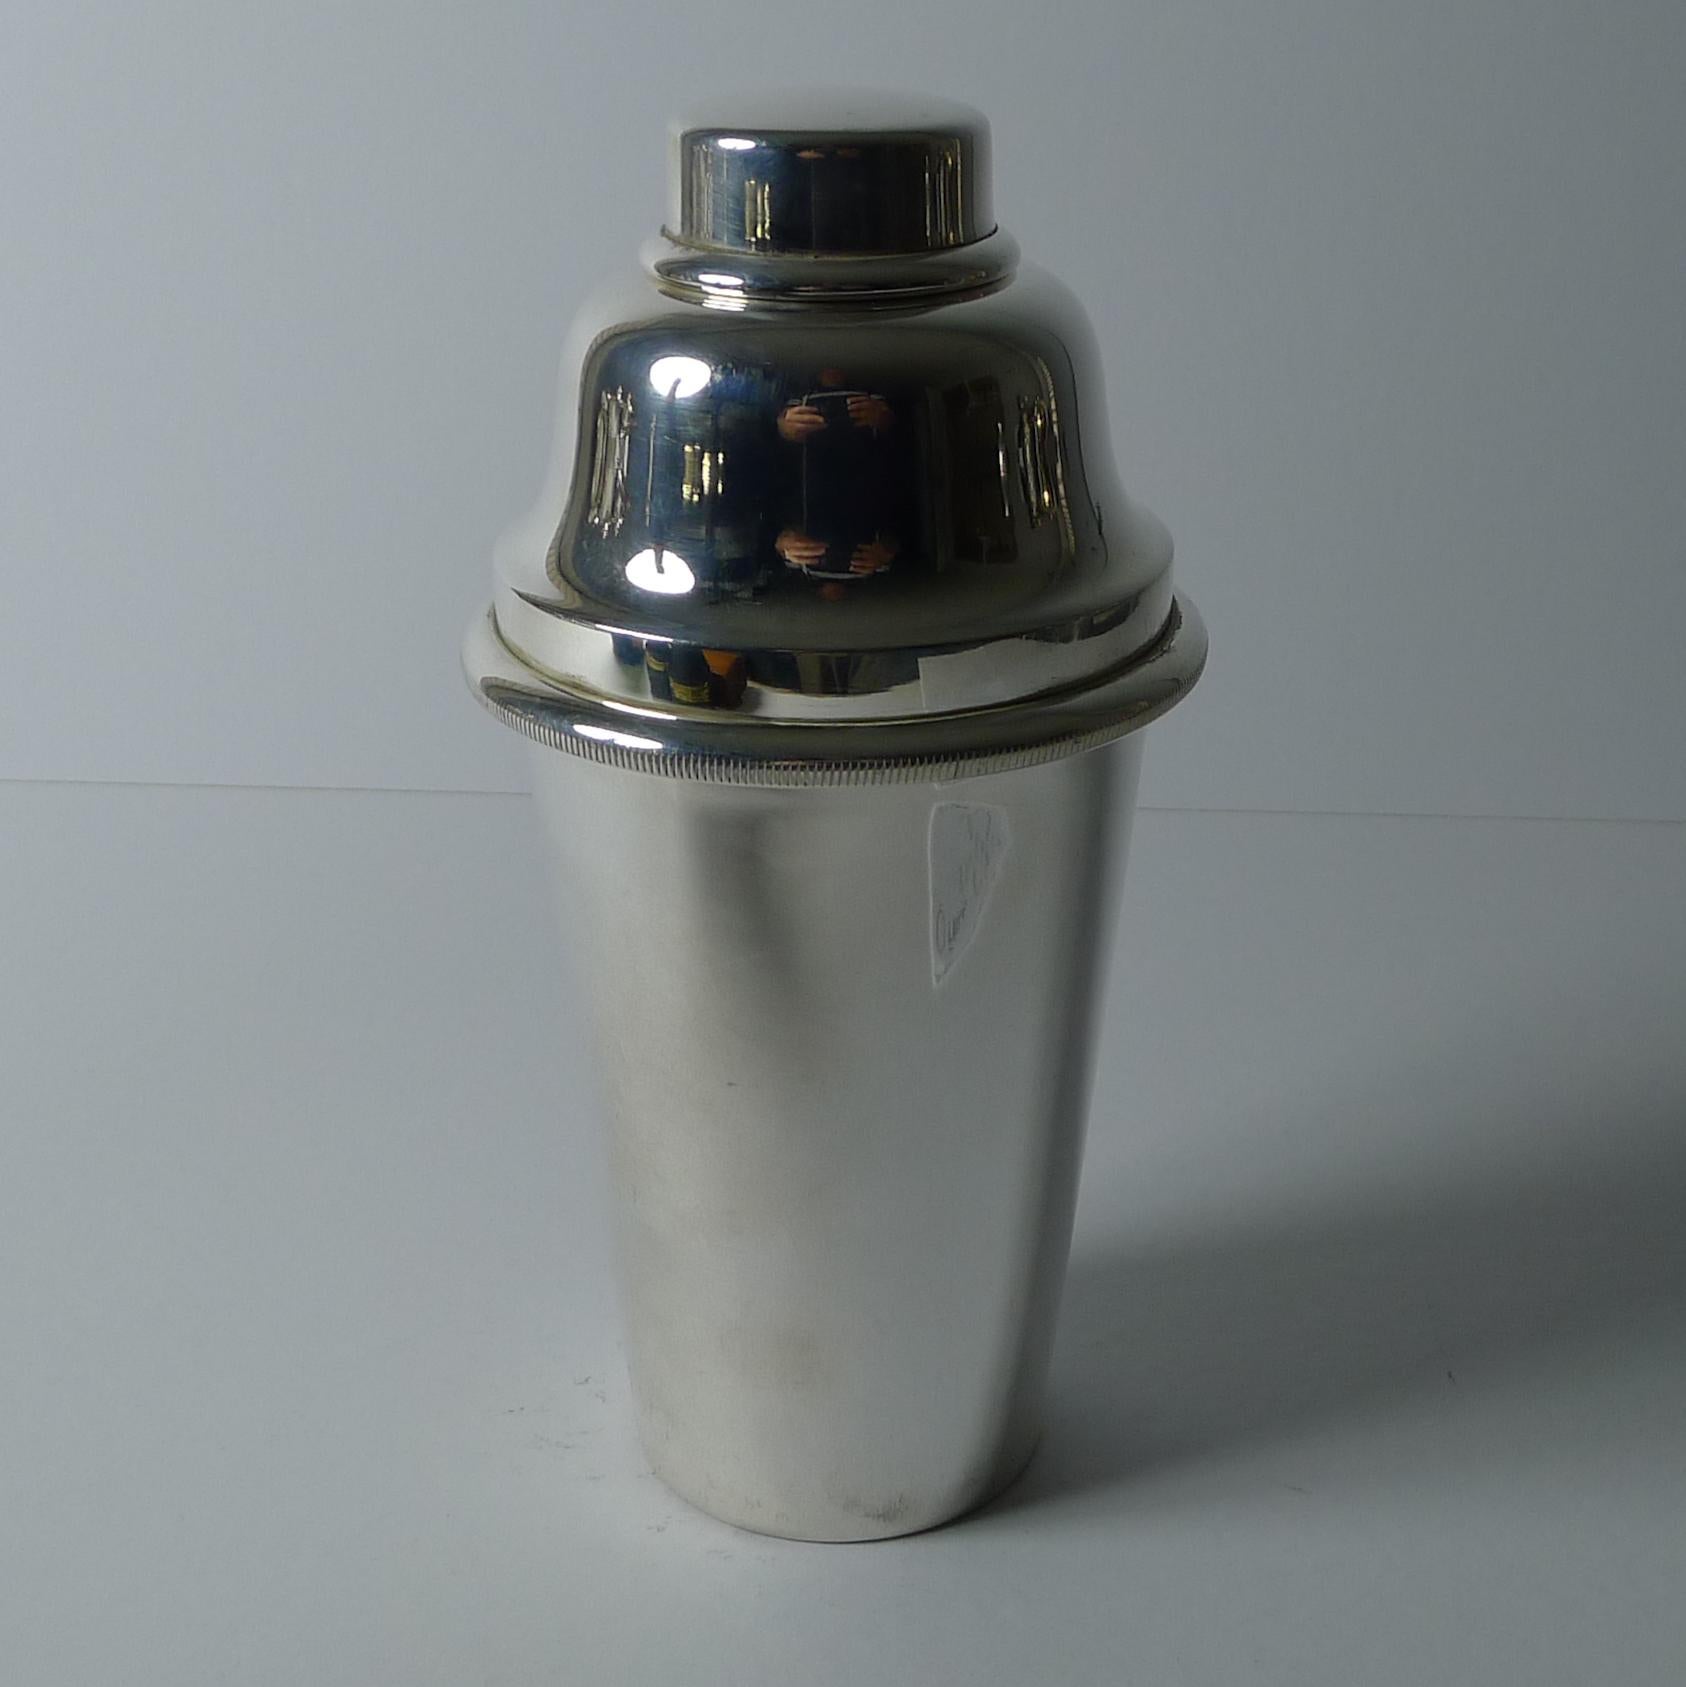 Made for the Restaurant de L'Aerogare in Geneva, Switzerland during the most glamourous years of travel during the 1930's / 1940's.

This Art Deco silver plated cocktail shaker was made by Orfevrerie H. Beard in Montreux, Switzerland.

Lovely